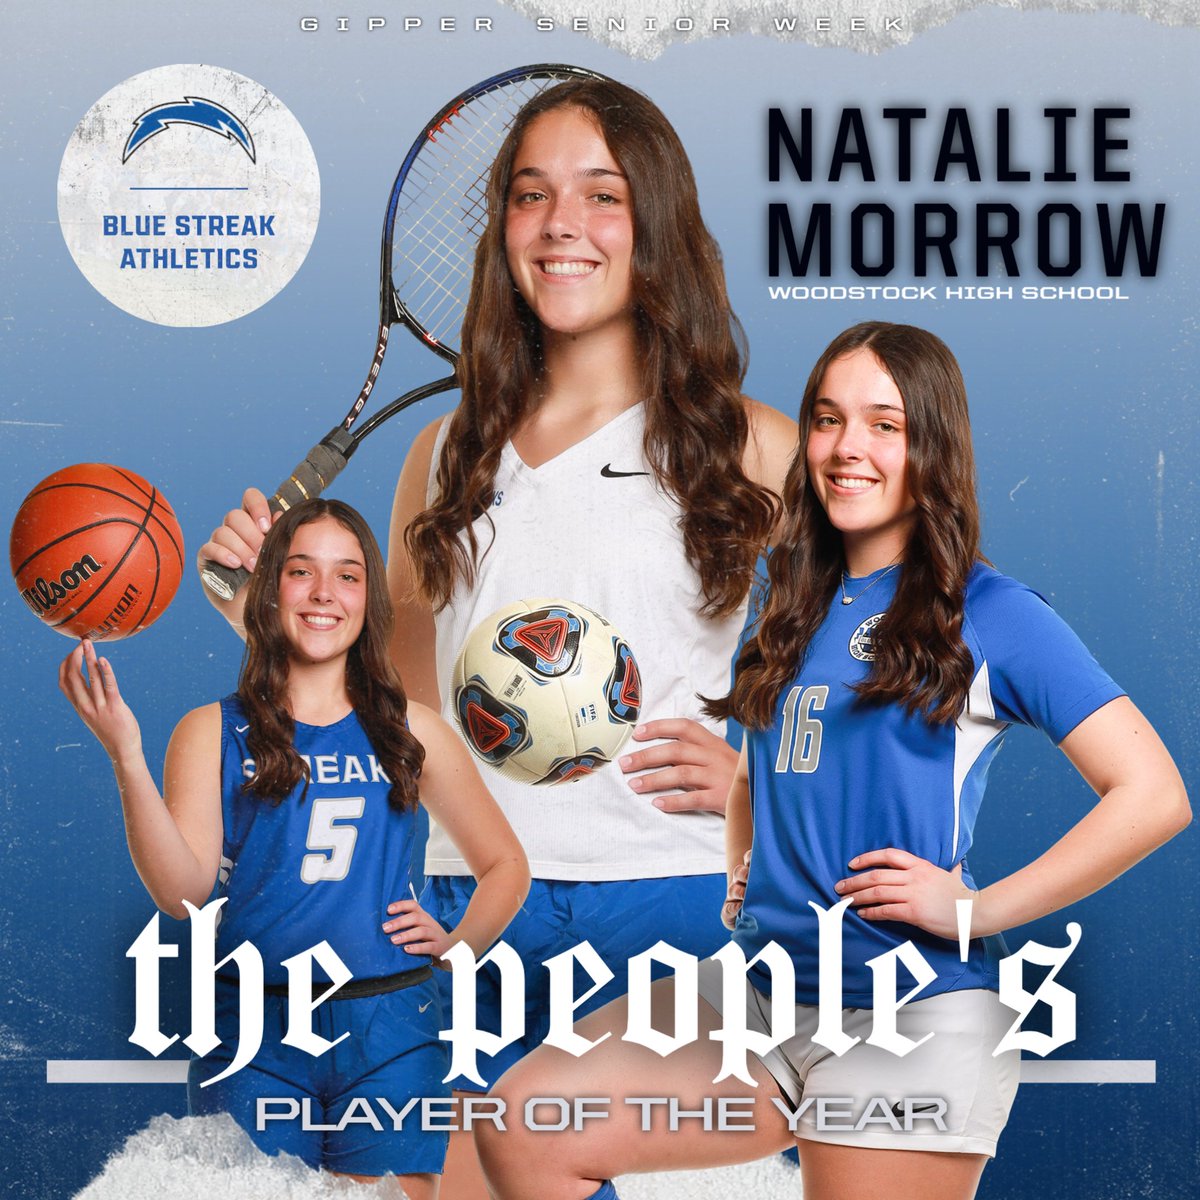 Our nominee for Girls People's Player of the Year, as voted on by the students... NATALIE MORROW 💙⚡️ Like, comment & share for Natalie! @gogipper #GipperSeniorWeek